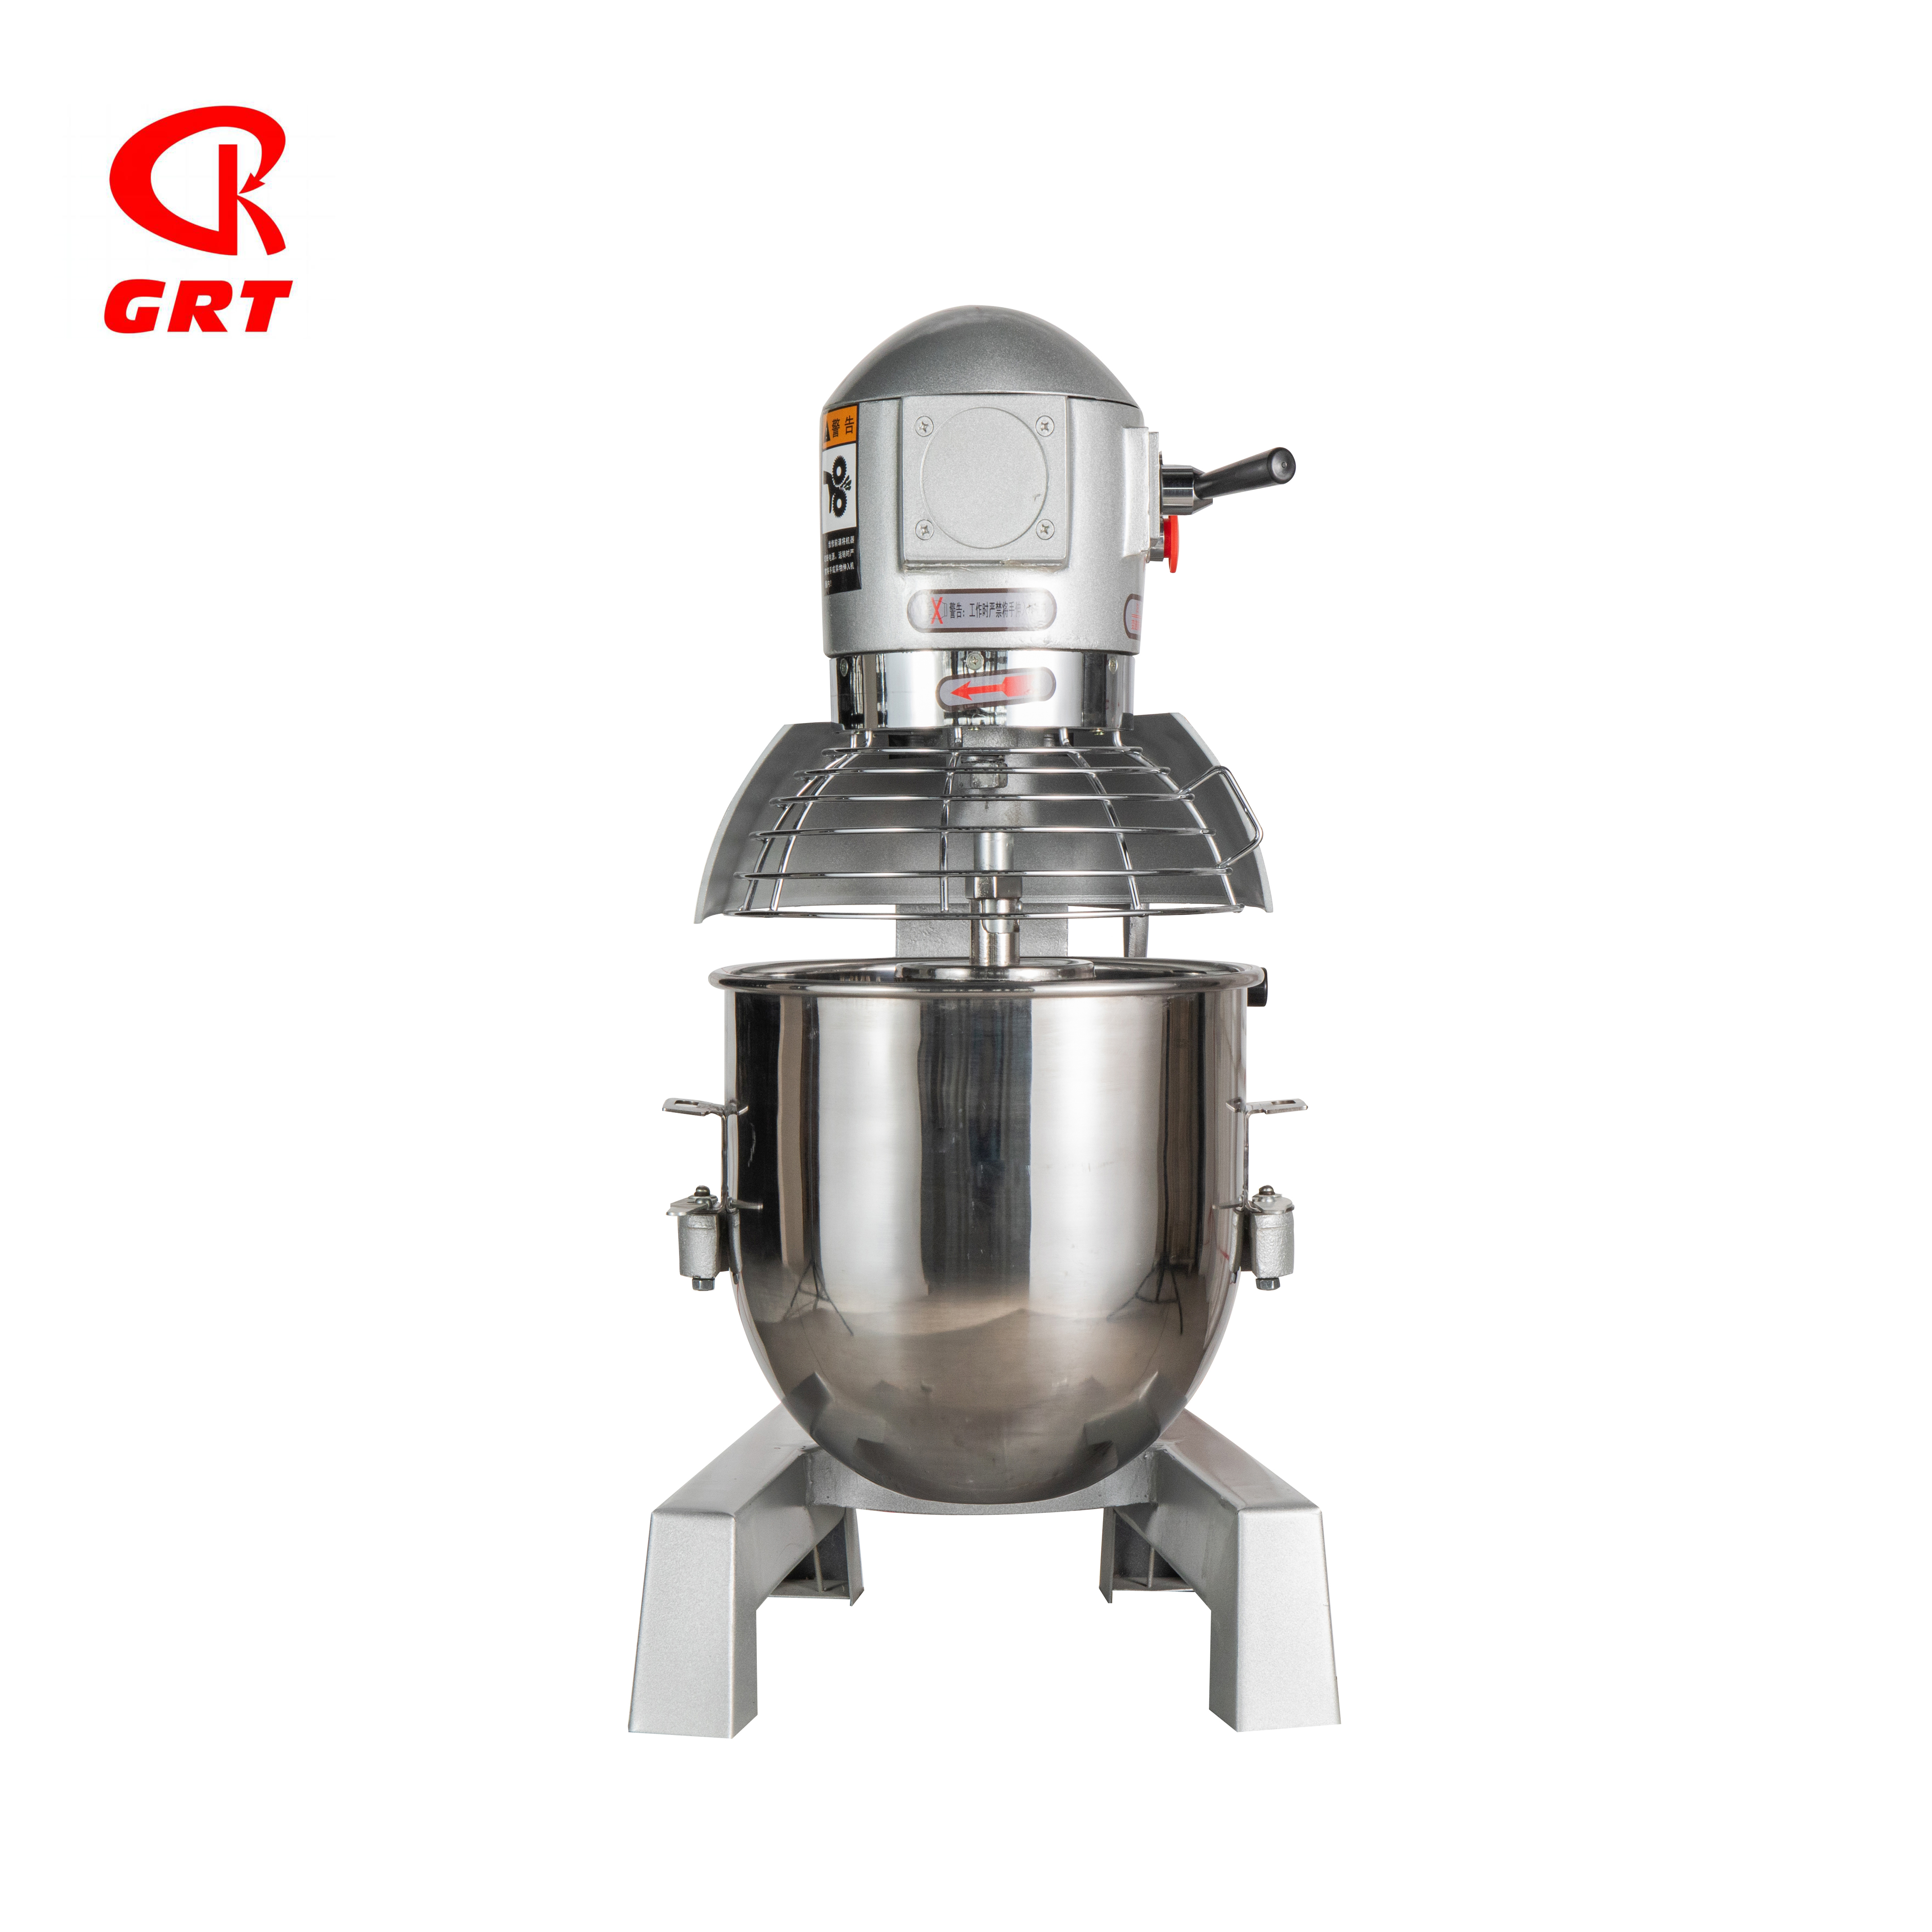 GRT-B20 Commercial Planetary Stand Mixer Planetary Food Mixer 20 Litre